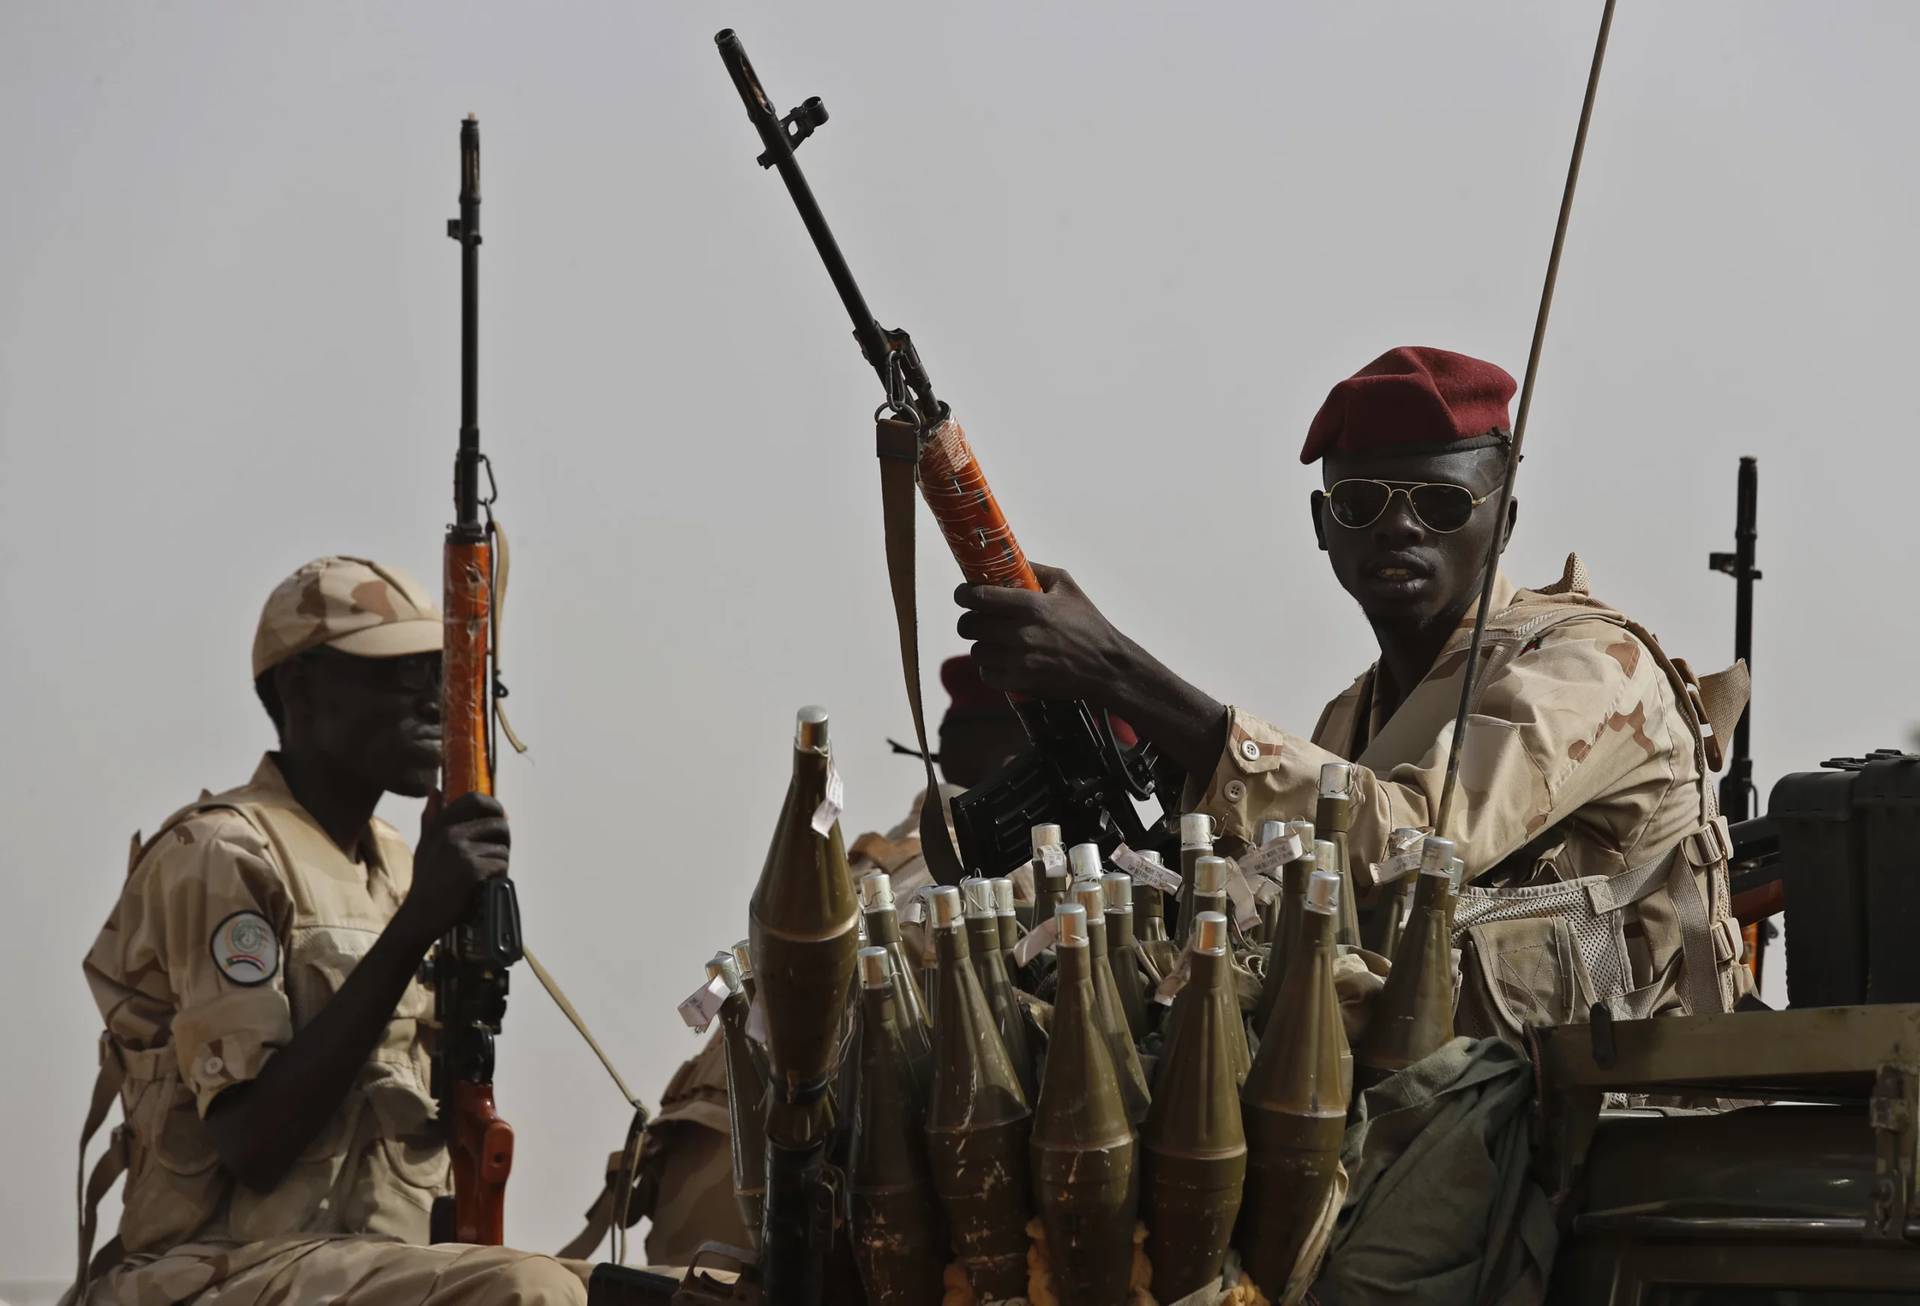 Sudanese soldiers from the Rapid Support Forces unit seen in the East Nile province of Sudan on June 22, 2019. (Credit: Hussein Malla/AP.)